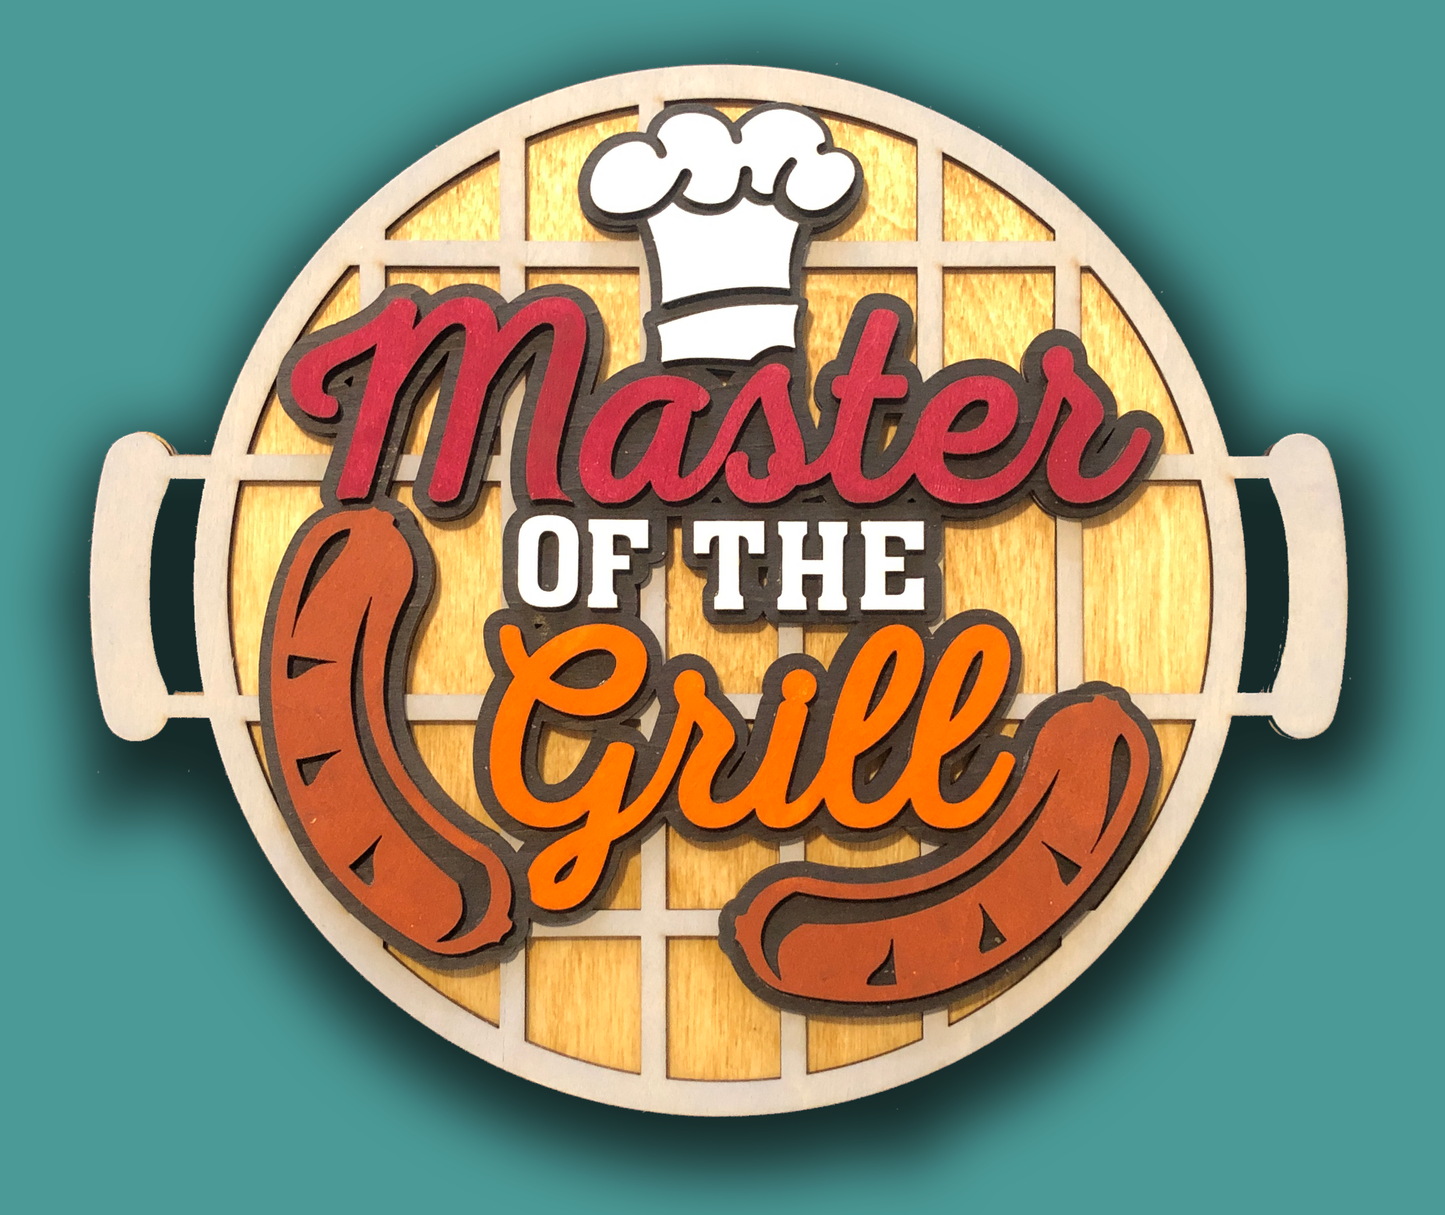 Master of the grill sign with layered 3D effect